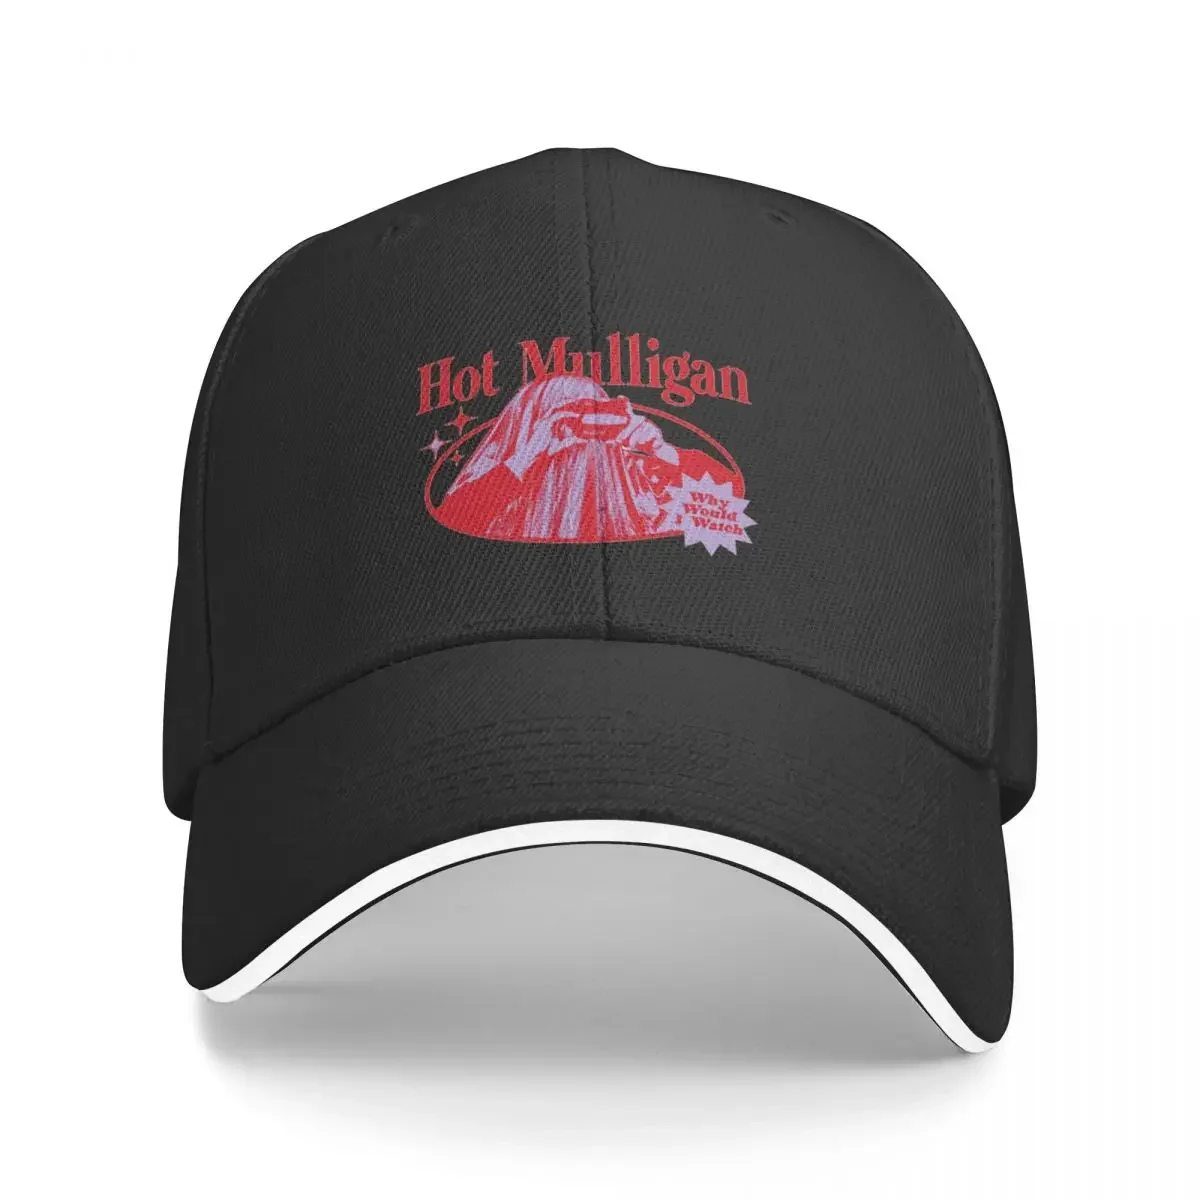 

Hot Mulligan's new album, Why Would I Watch Baseball Cap Hat Baseball Cap Hat Beach New In The Hat For Men Women's